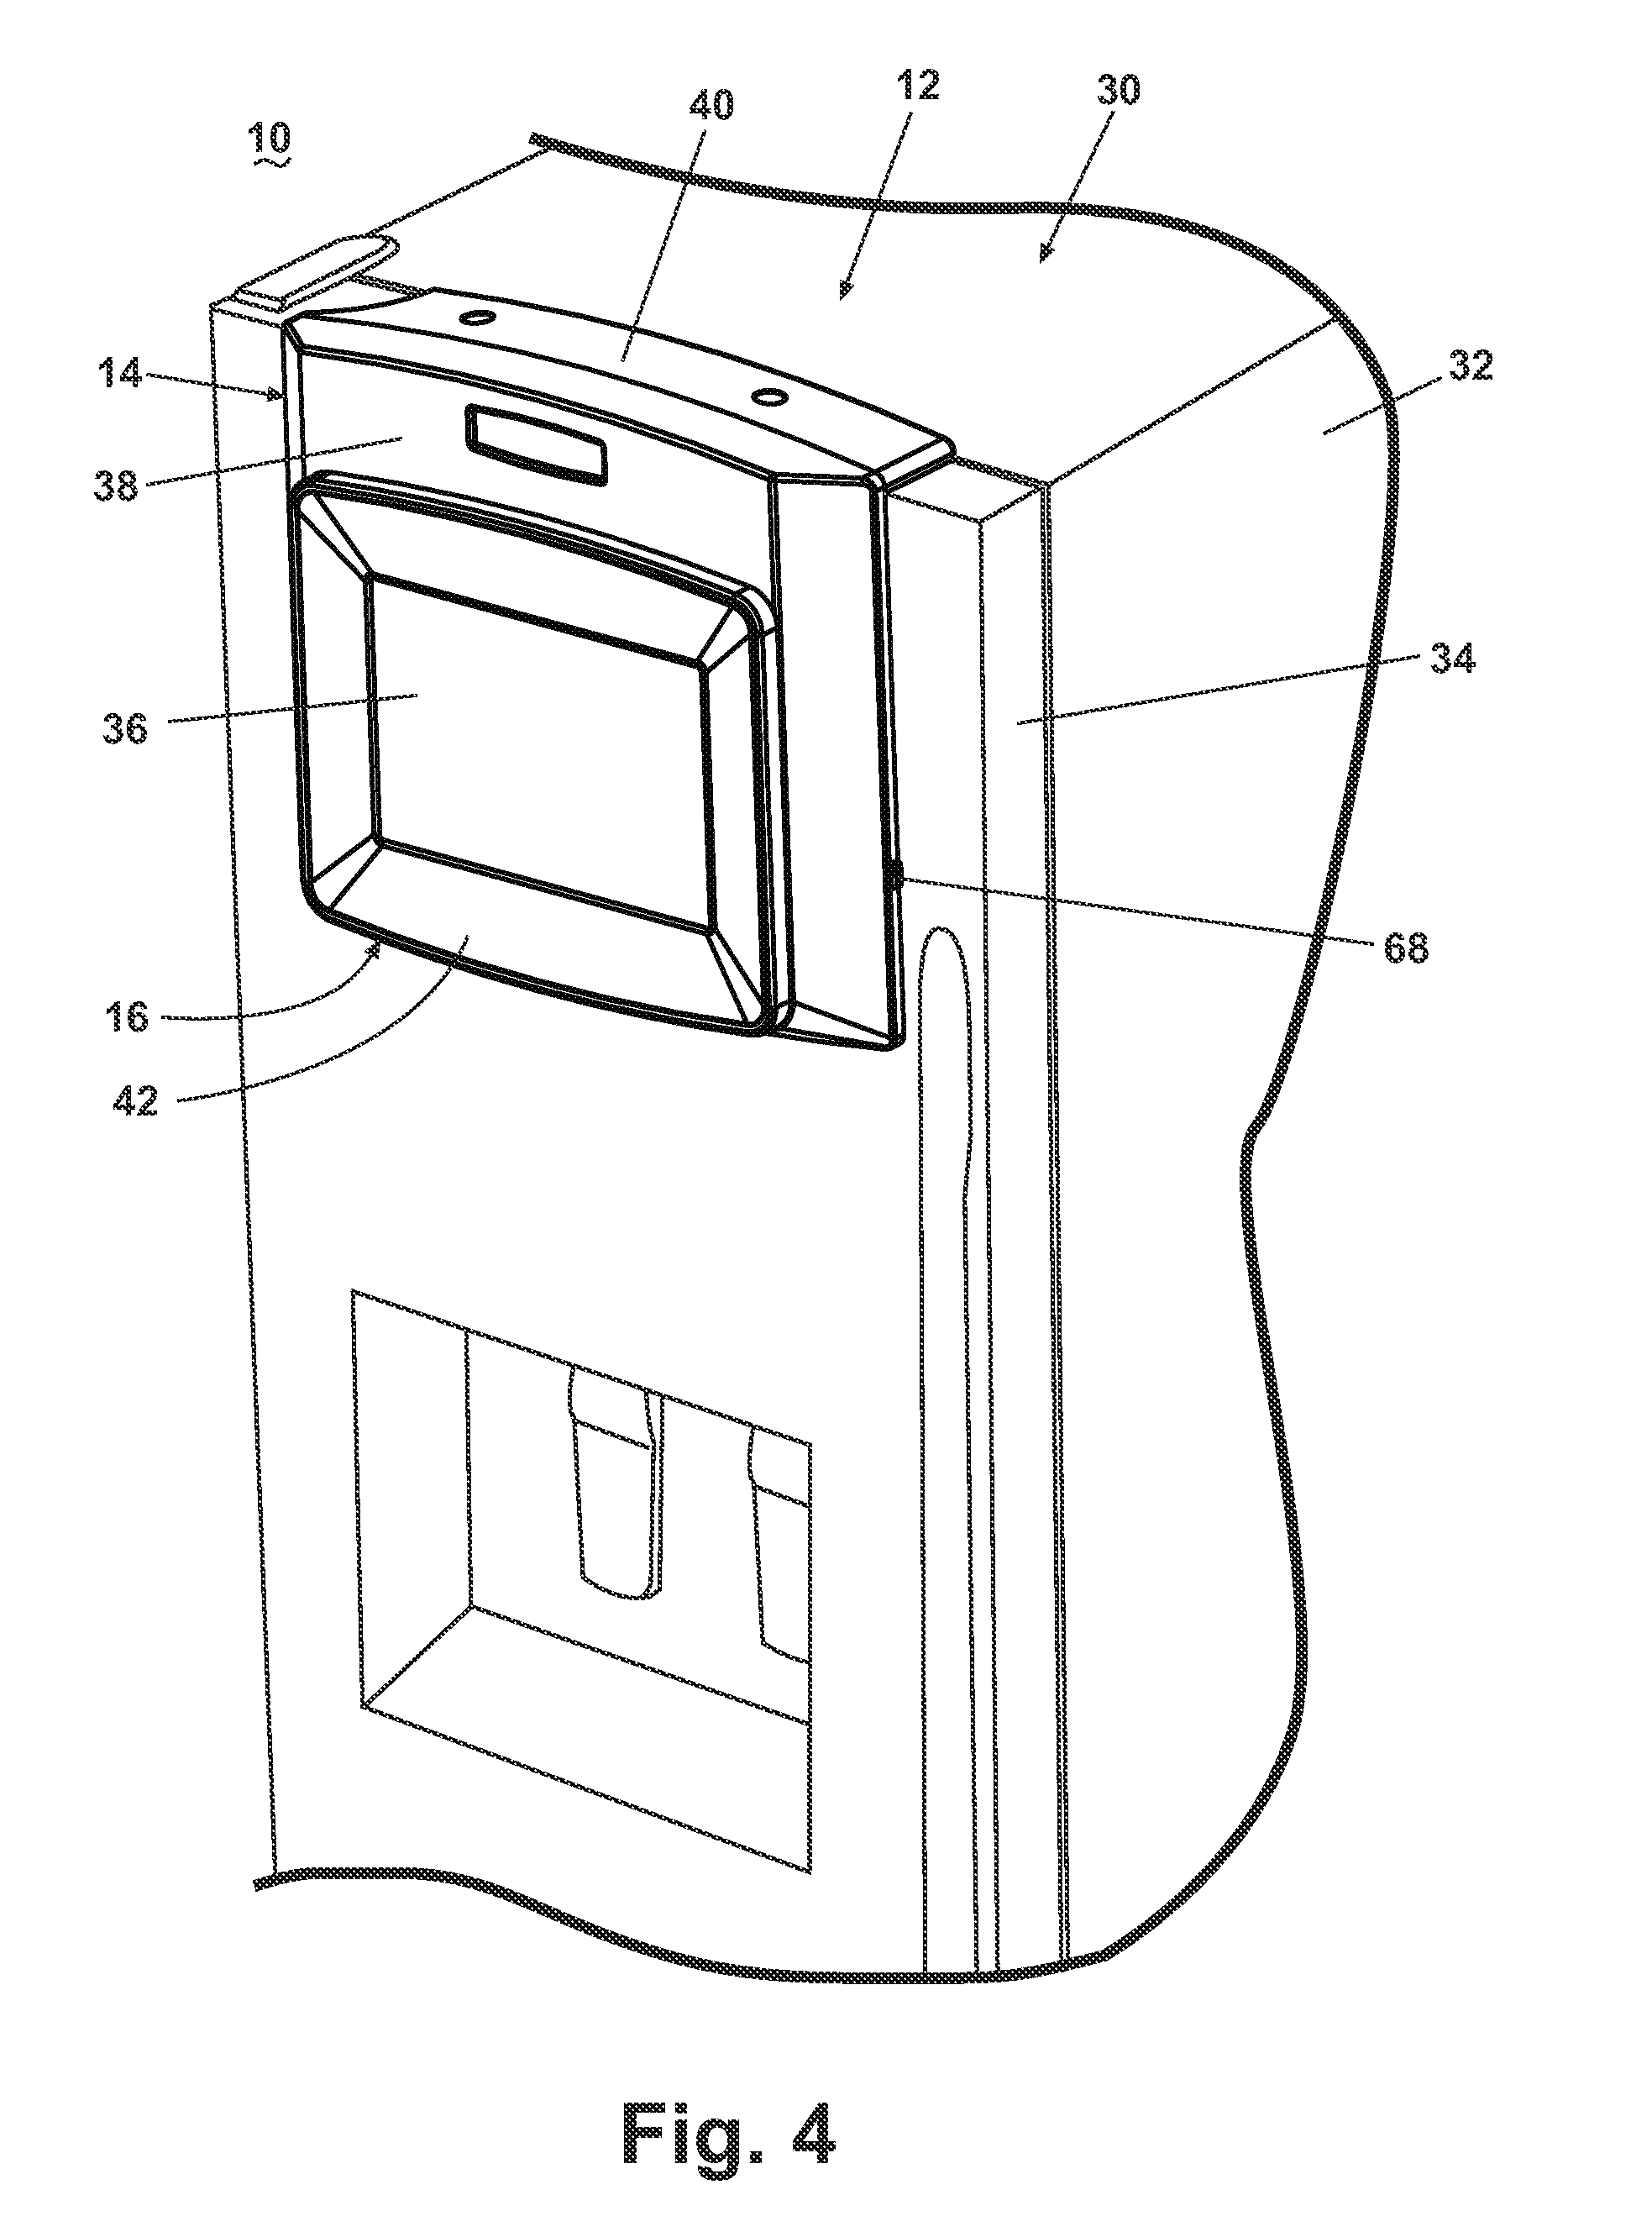 Adapter and consumer electronic device functional unit